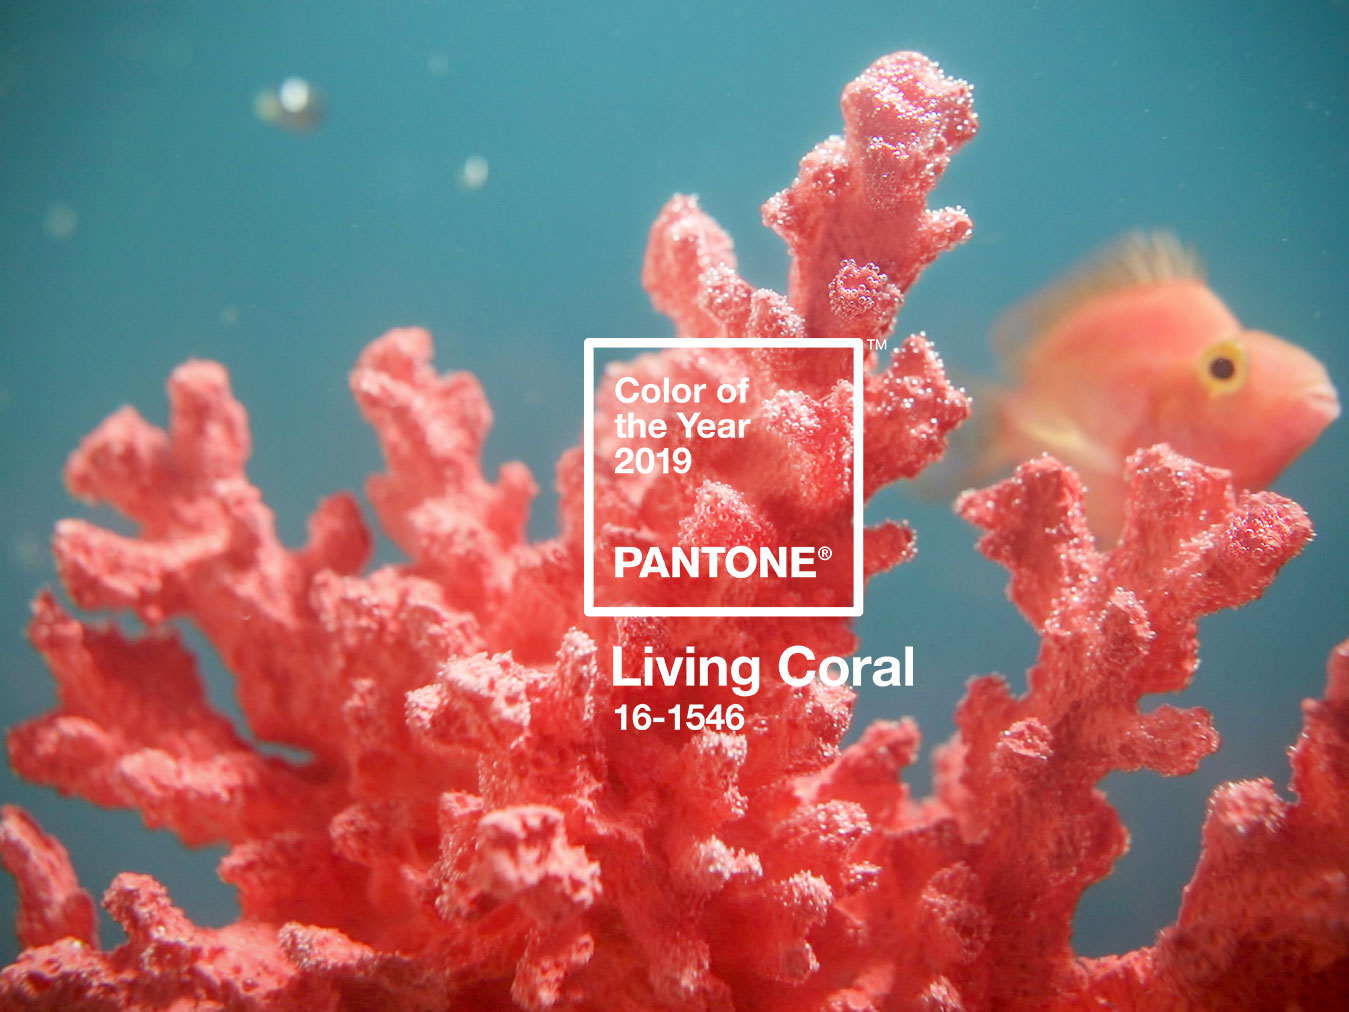 The 2019 Pantone Color of the Year: Living Coral (PANTONE 16-1546